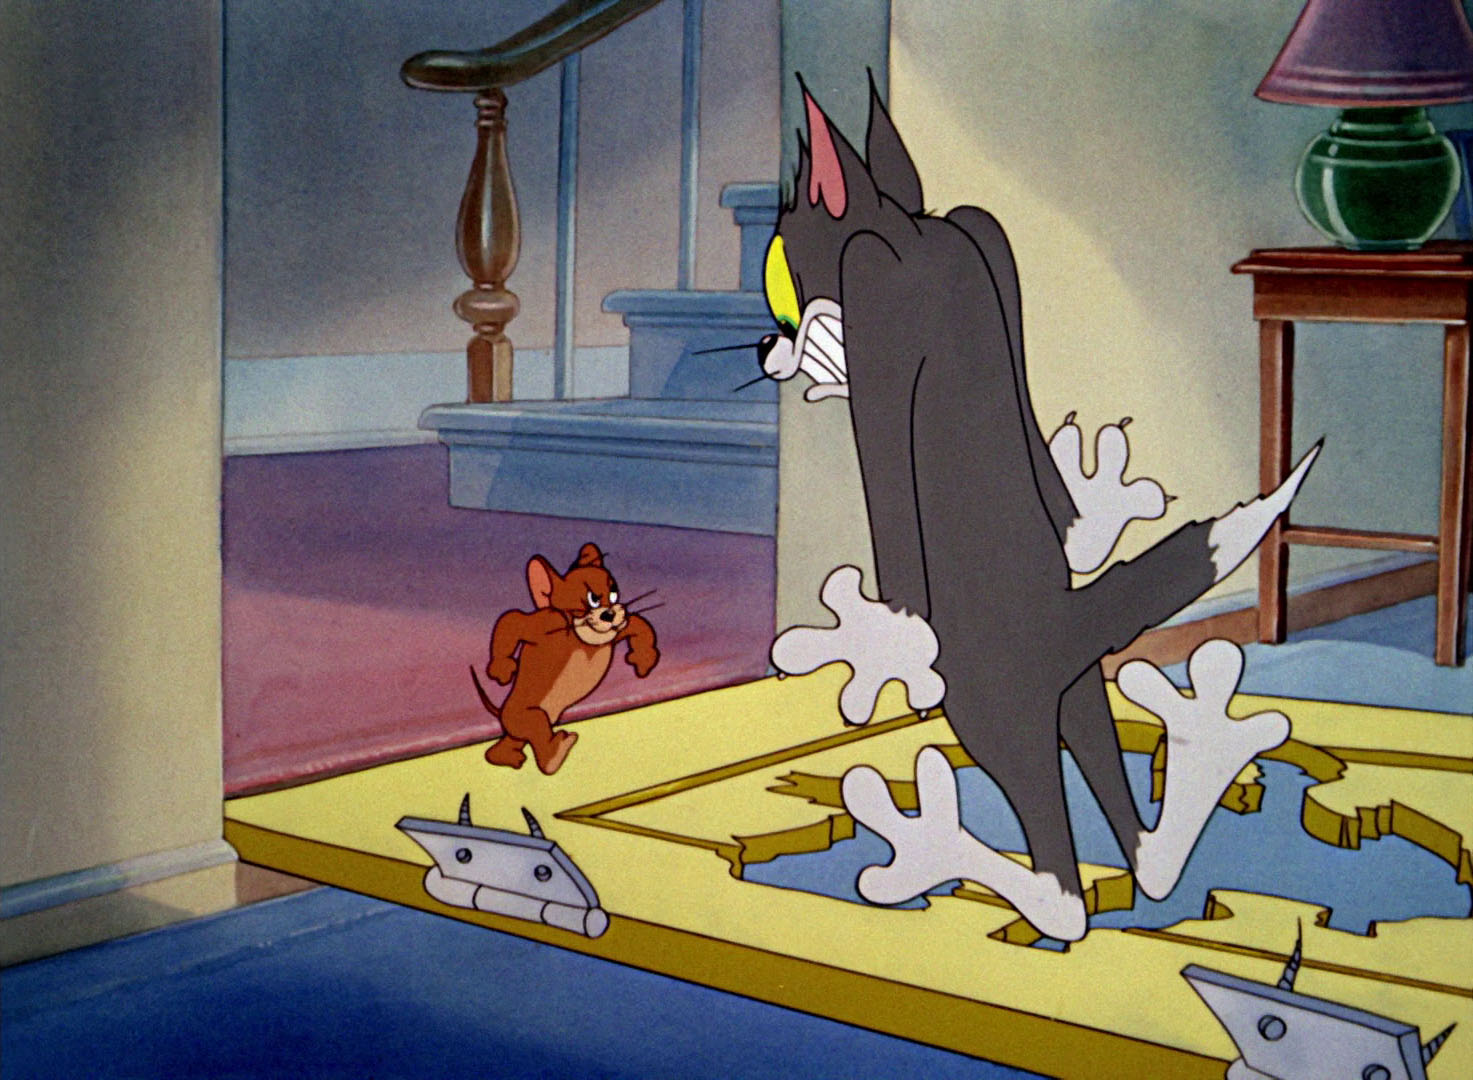 Tom & Jerry Pictures: "Dr. Jekyll and Mr. Mouse" .